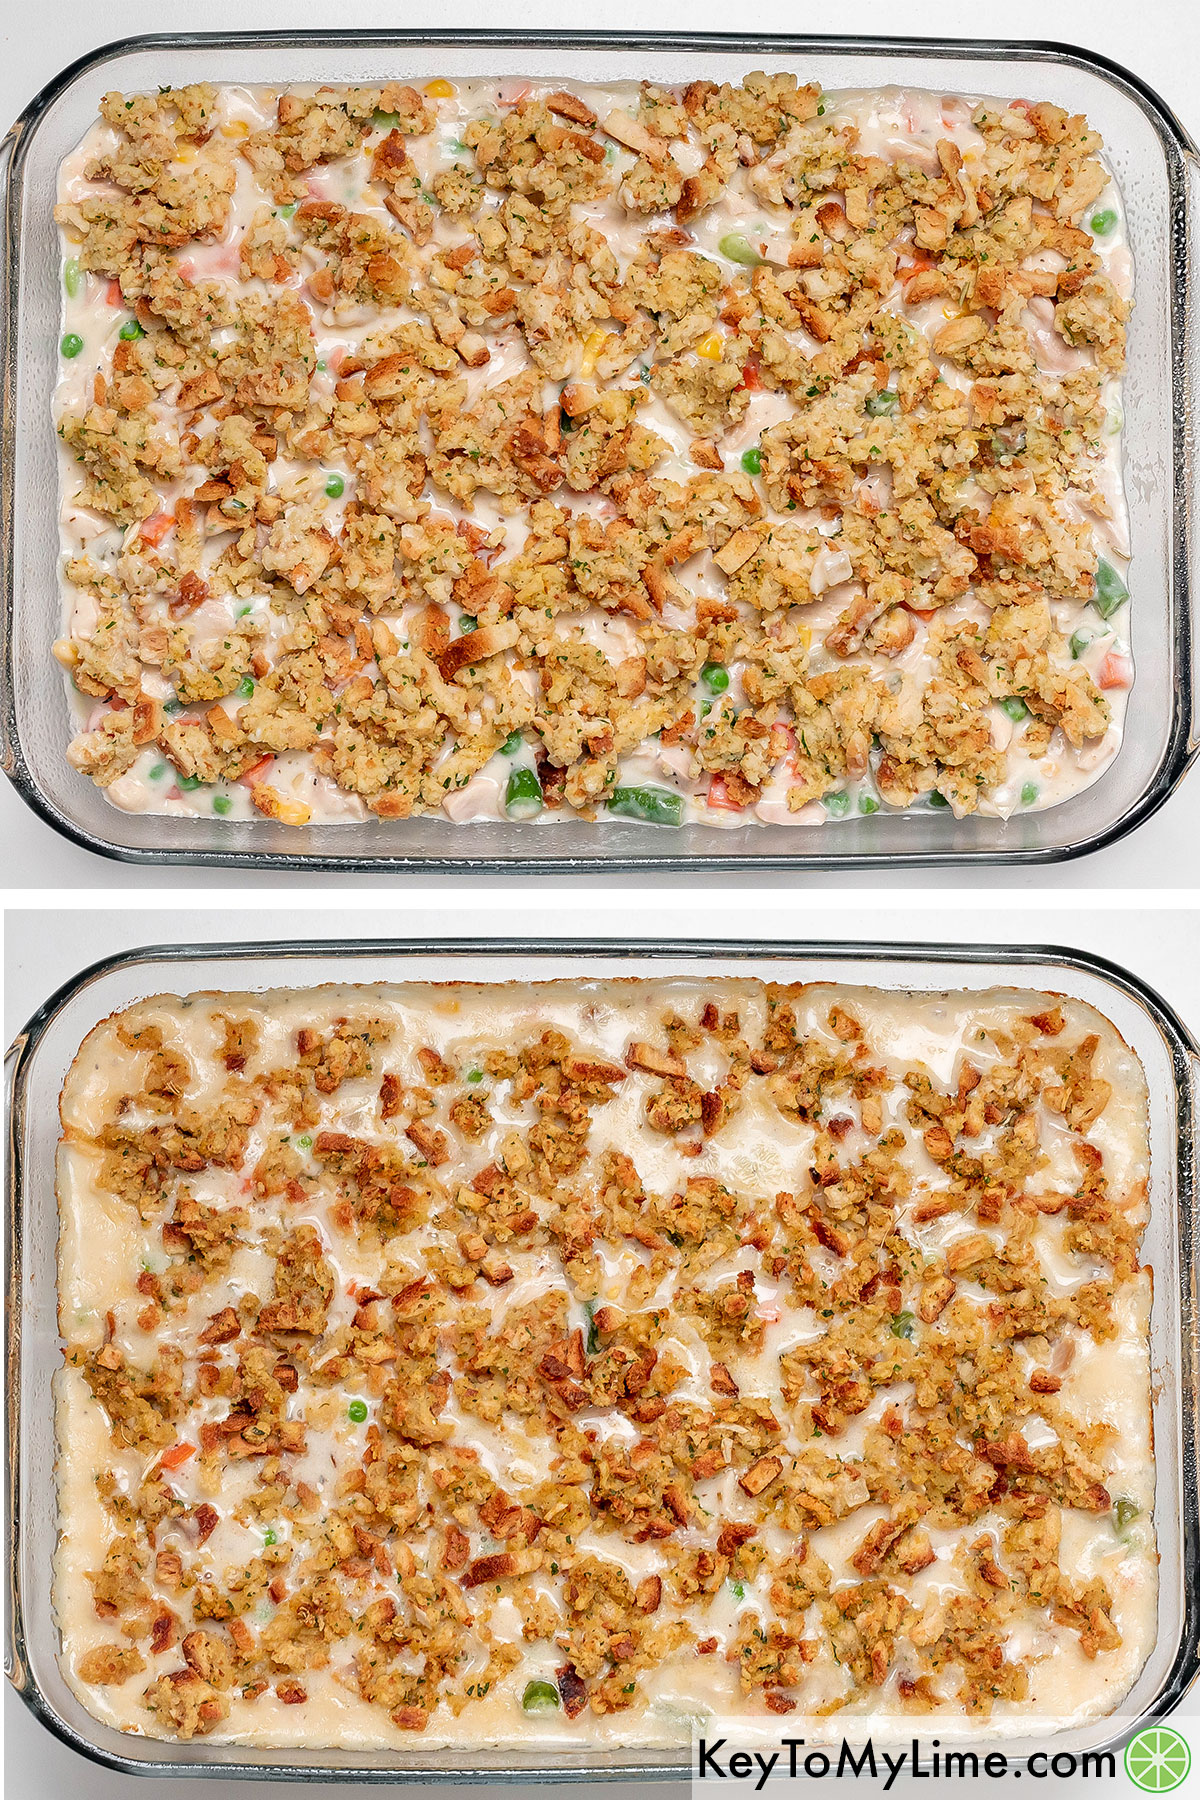 Spreading the stuffing across the top of the mixture and then baking in a preheated oven.